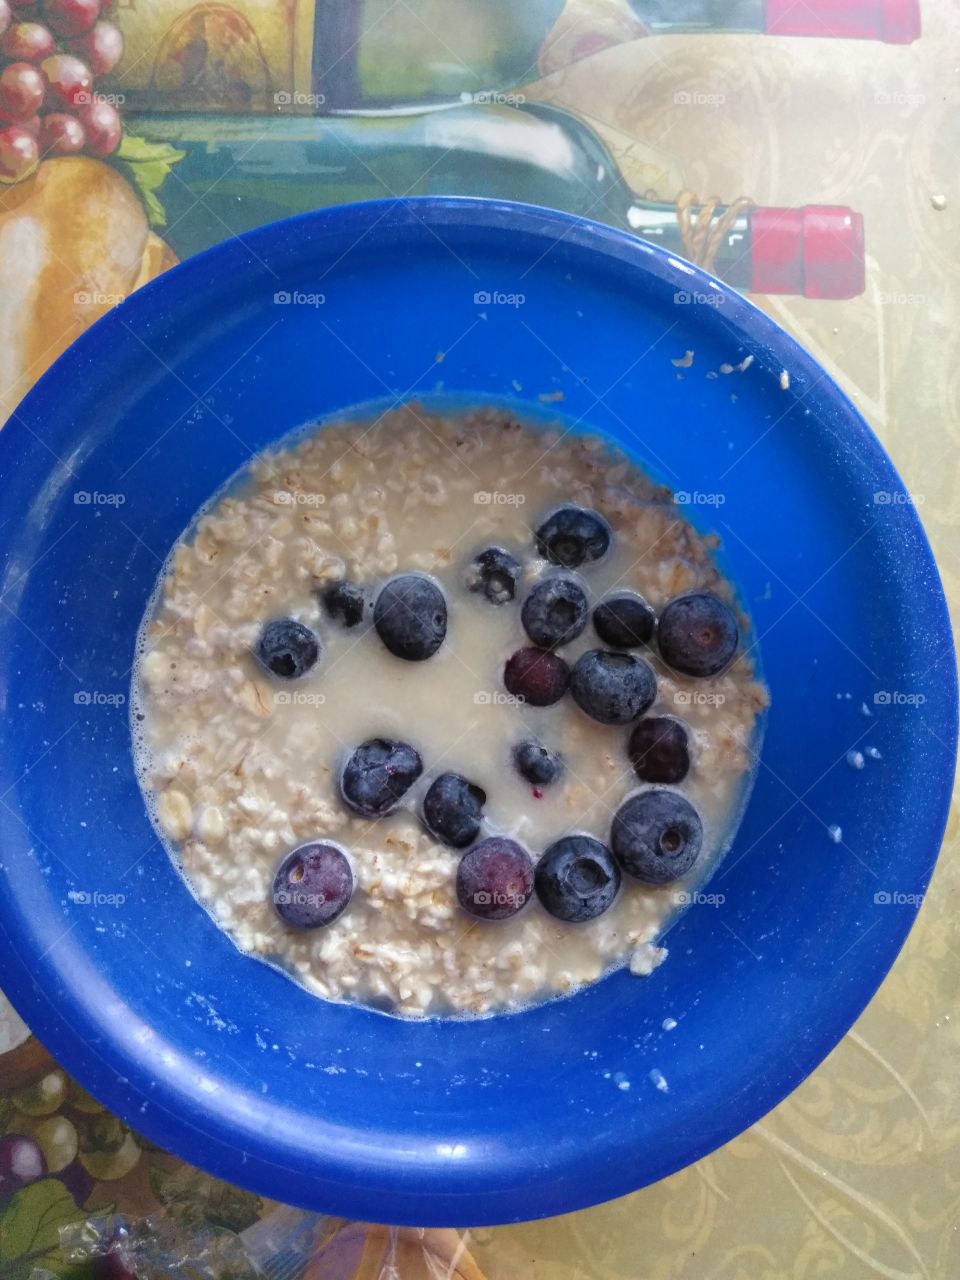 Blueberries with Oatmeal